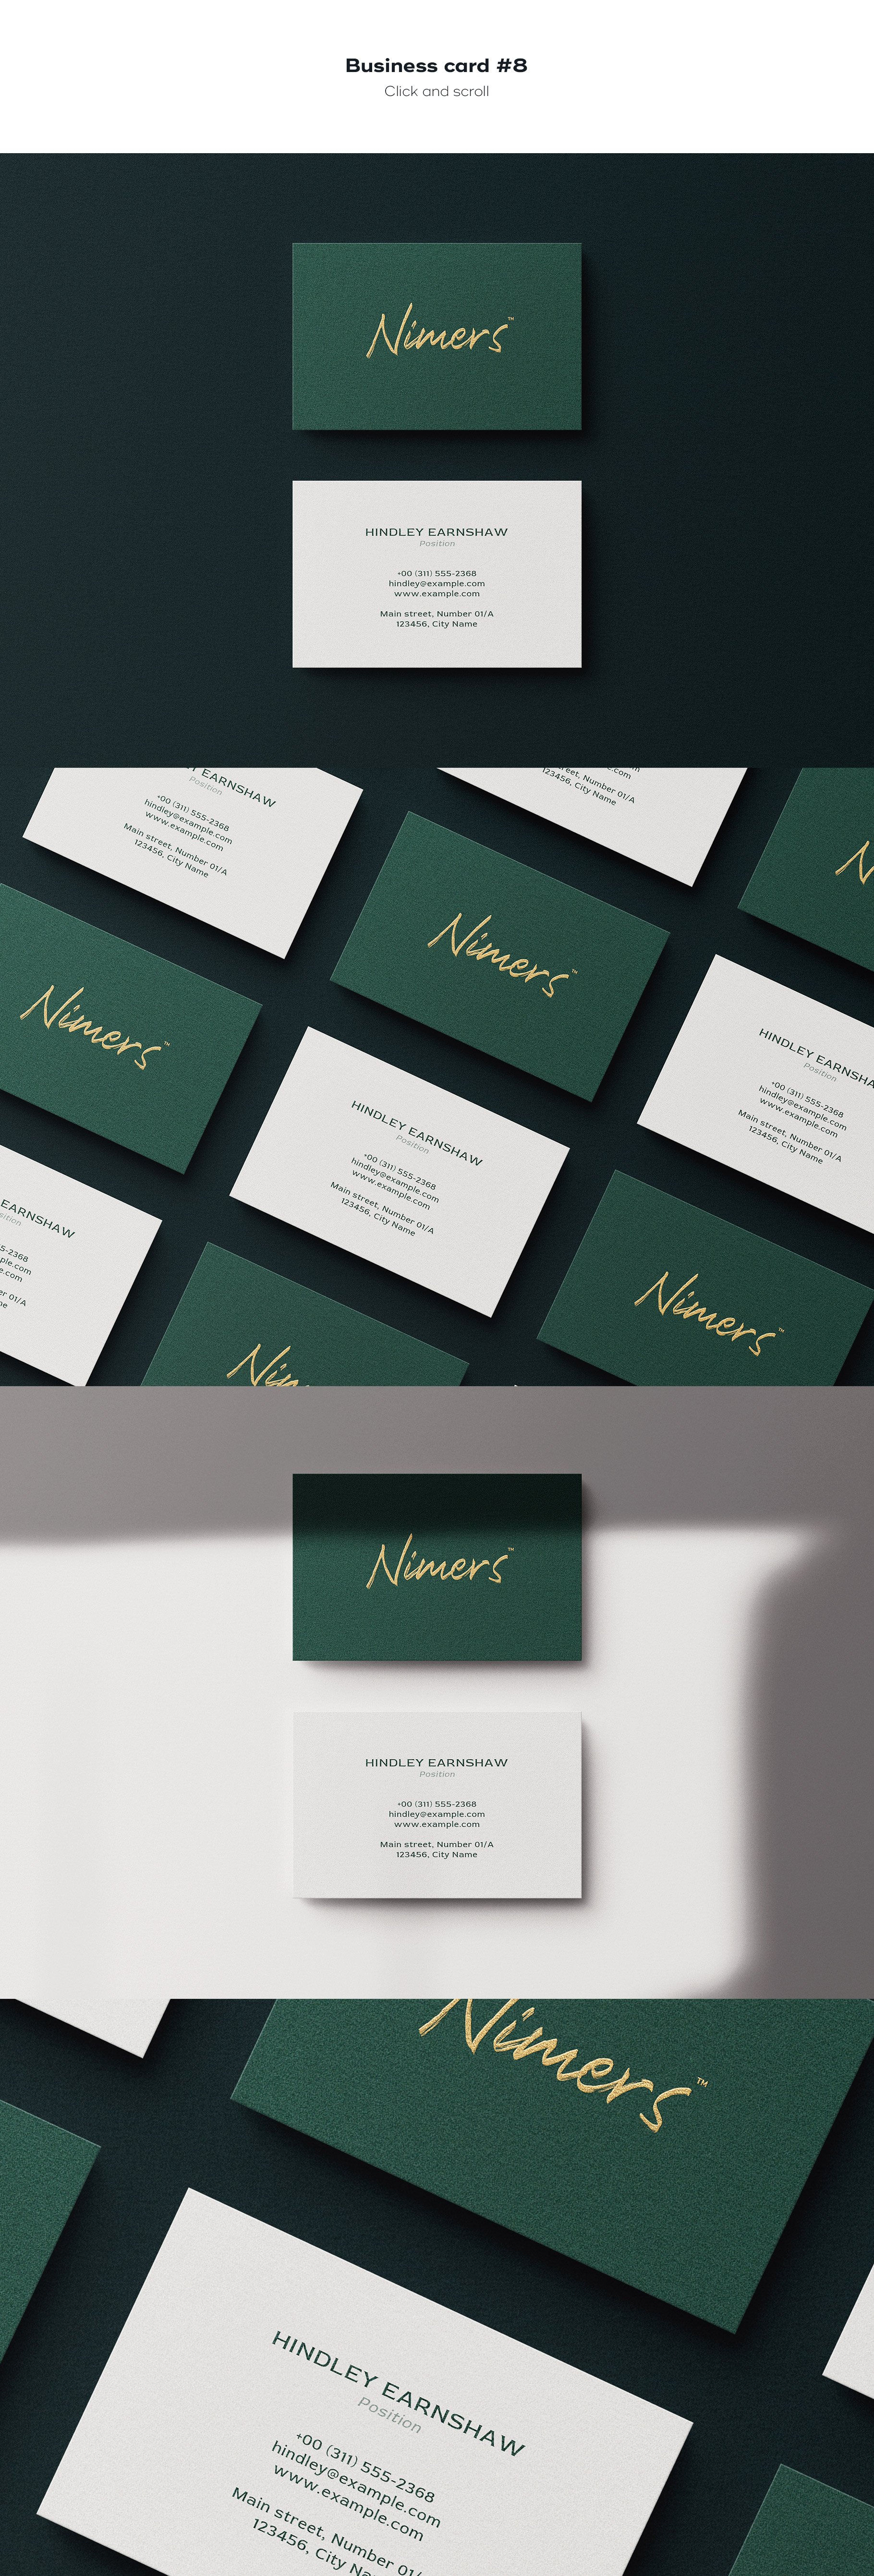 business card 8 778